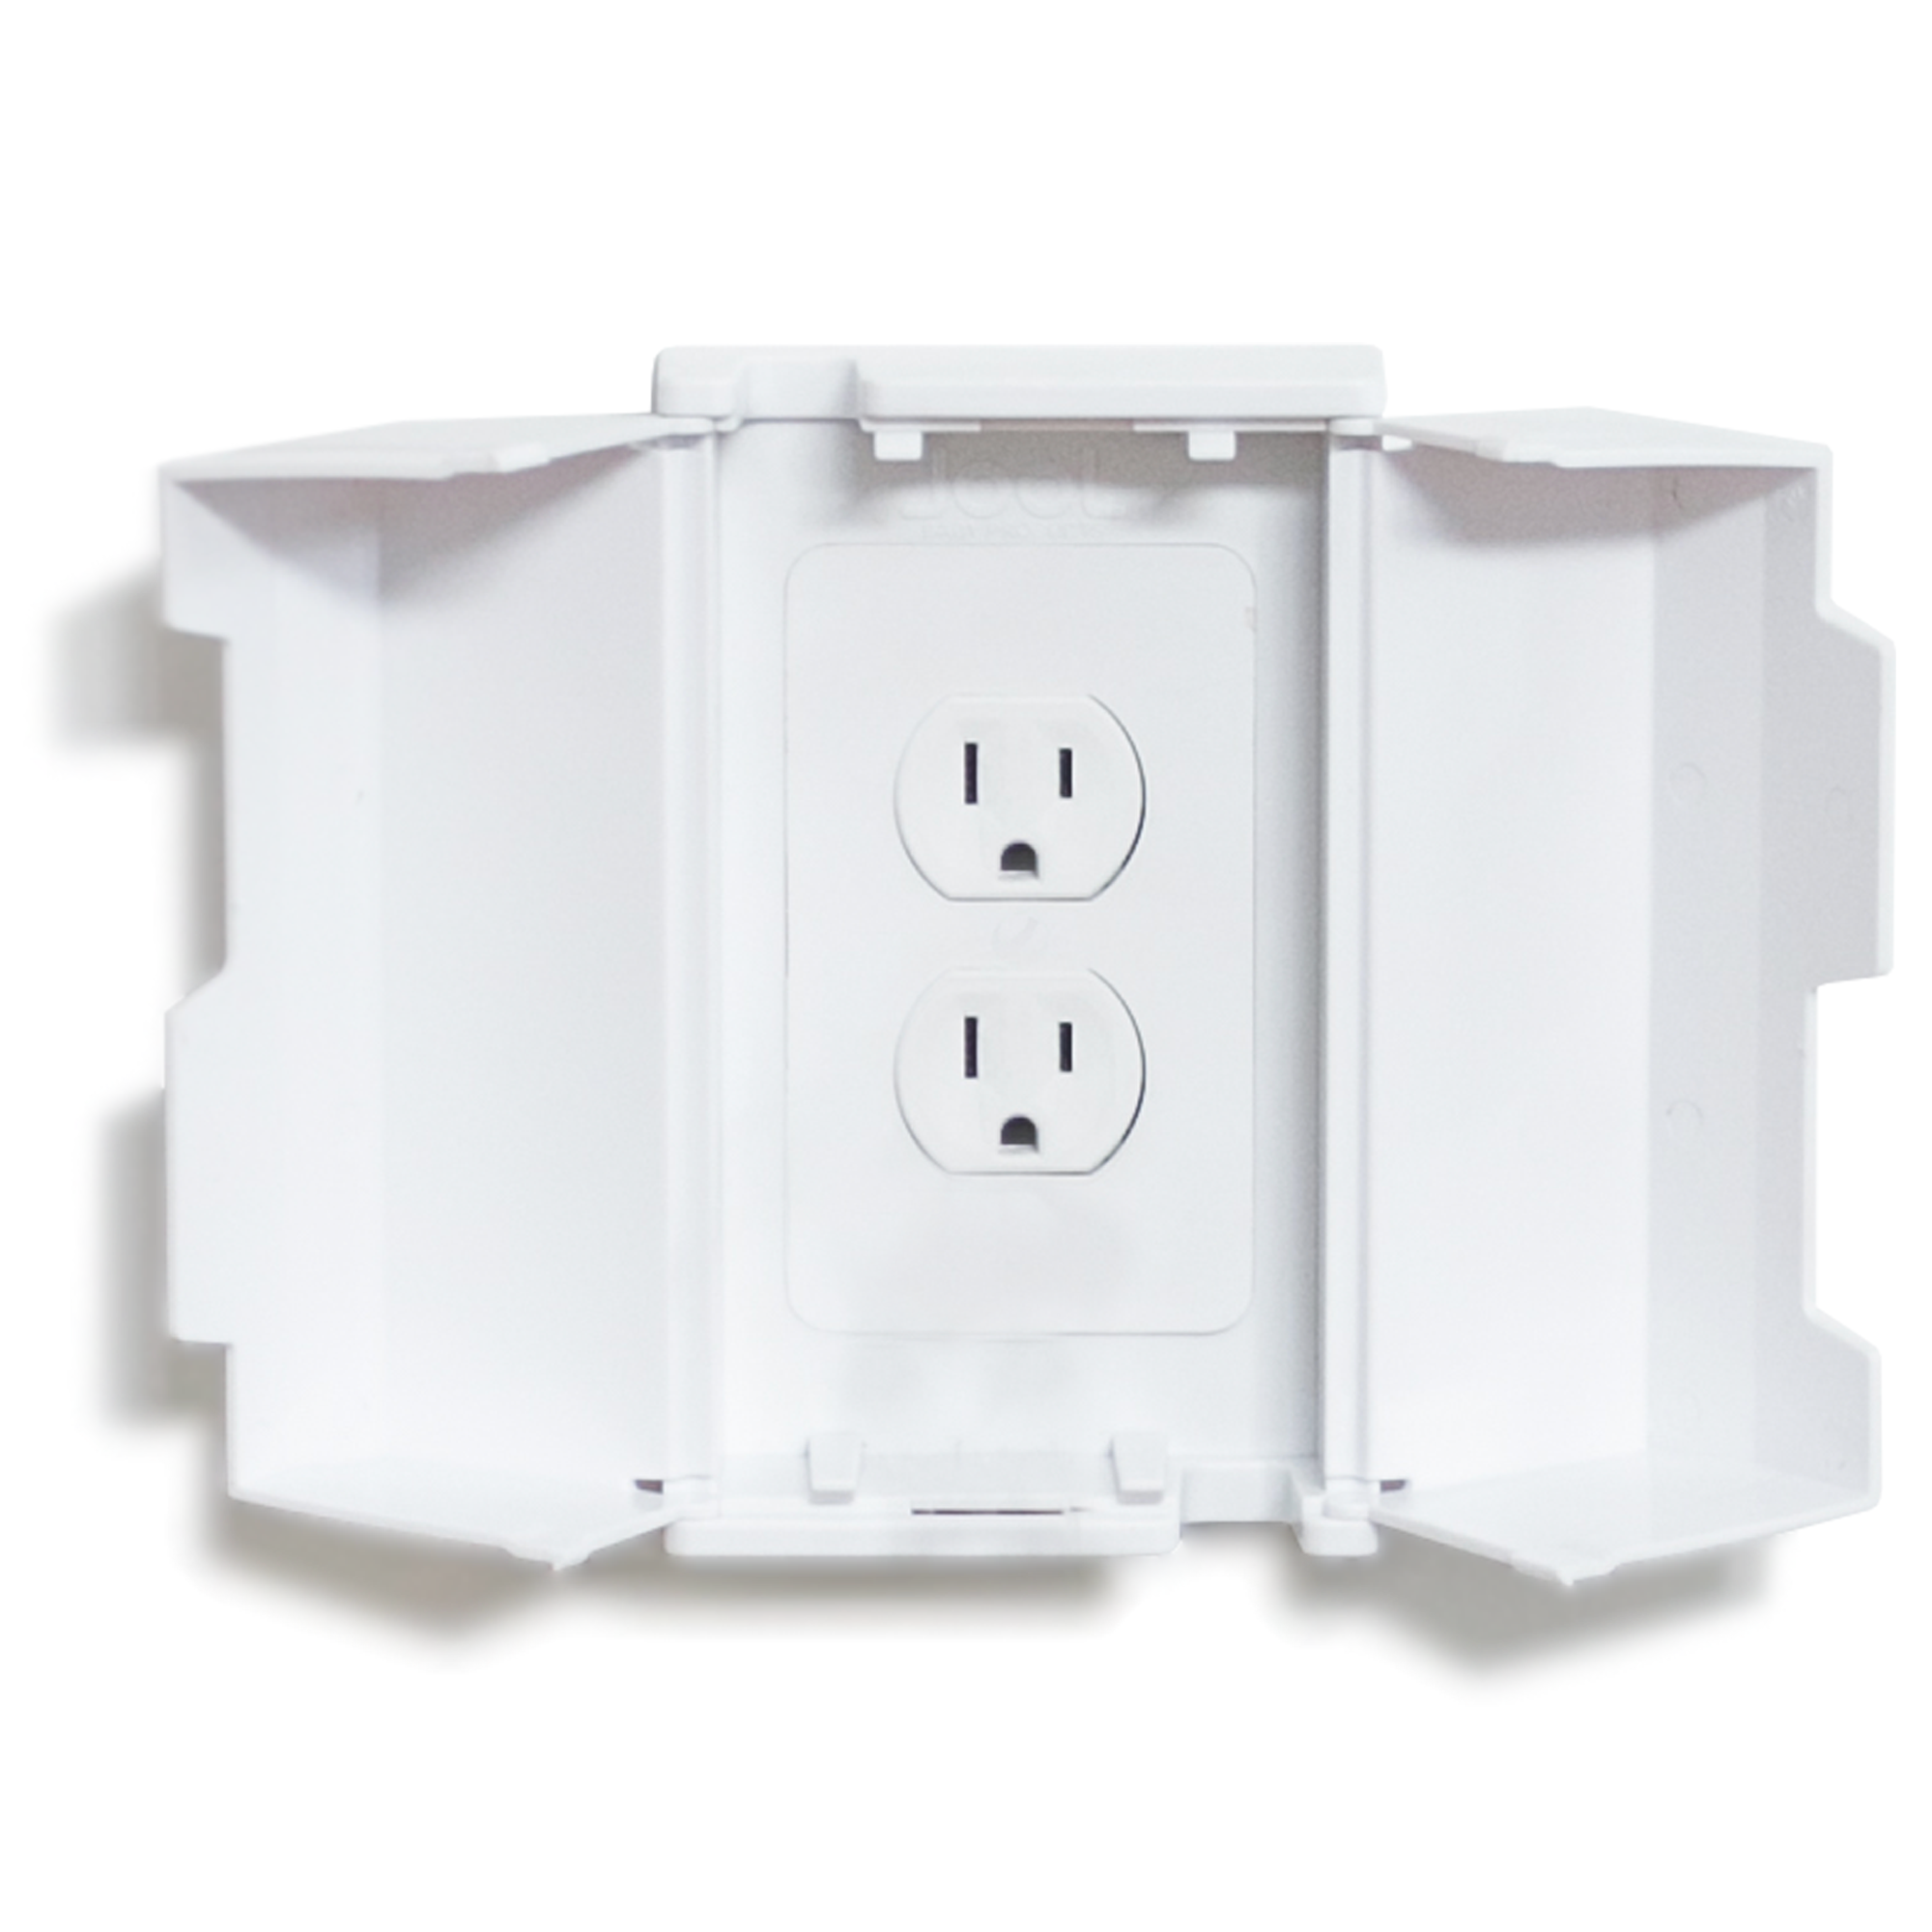 Electrical Outlet Cover Box (2 Pack)